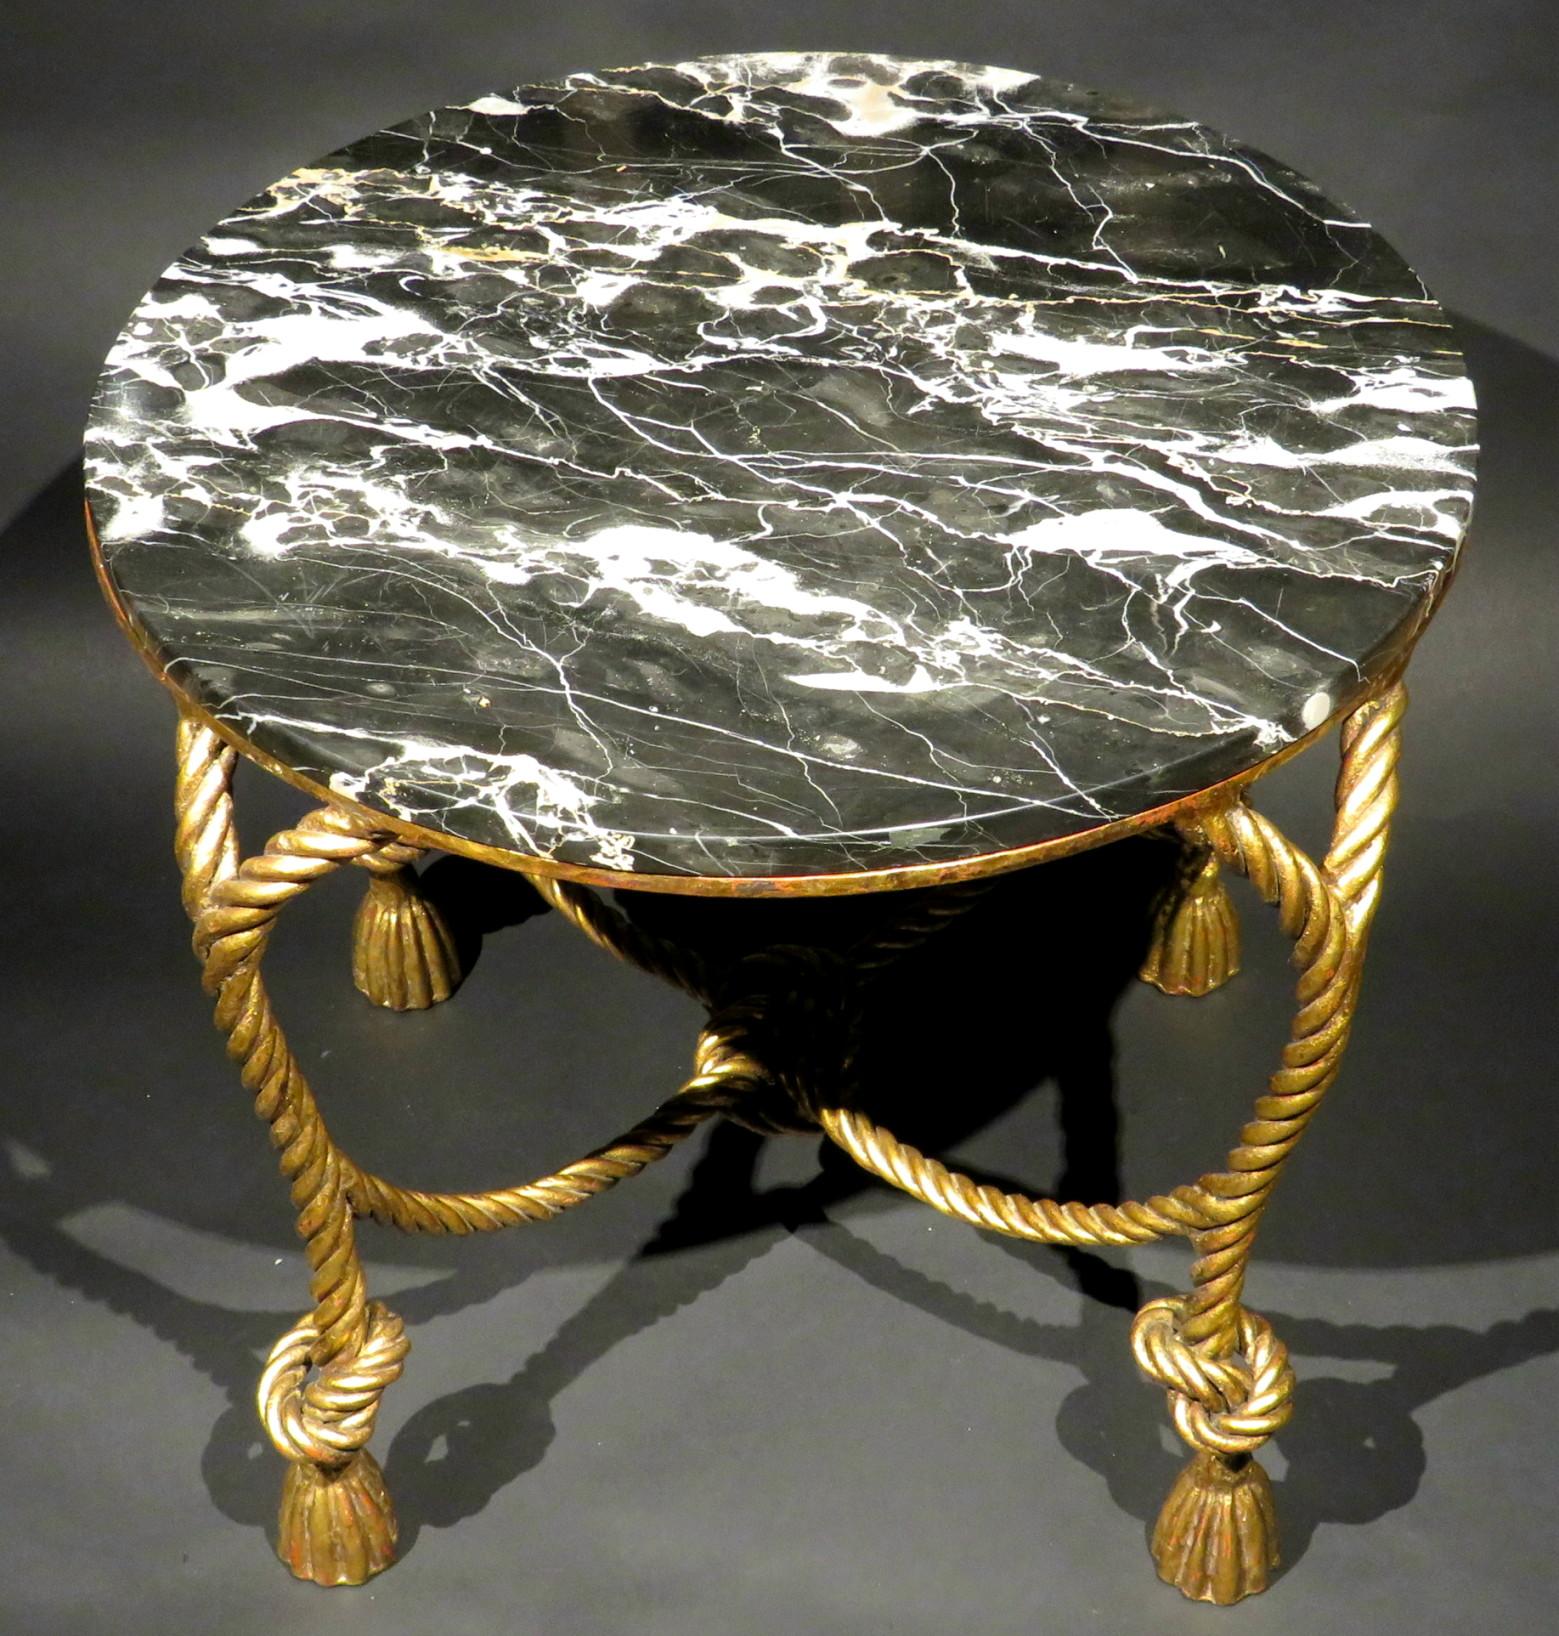 A highly decorative mid 20th century marble topped coffee table / side table, showing a circular mottled black & white marble top resting upon its conforming gilt metal frame styled in a faux rope & tassel design. The underside of each foot stamped